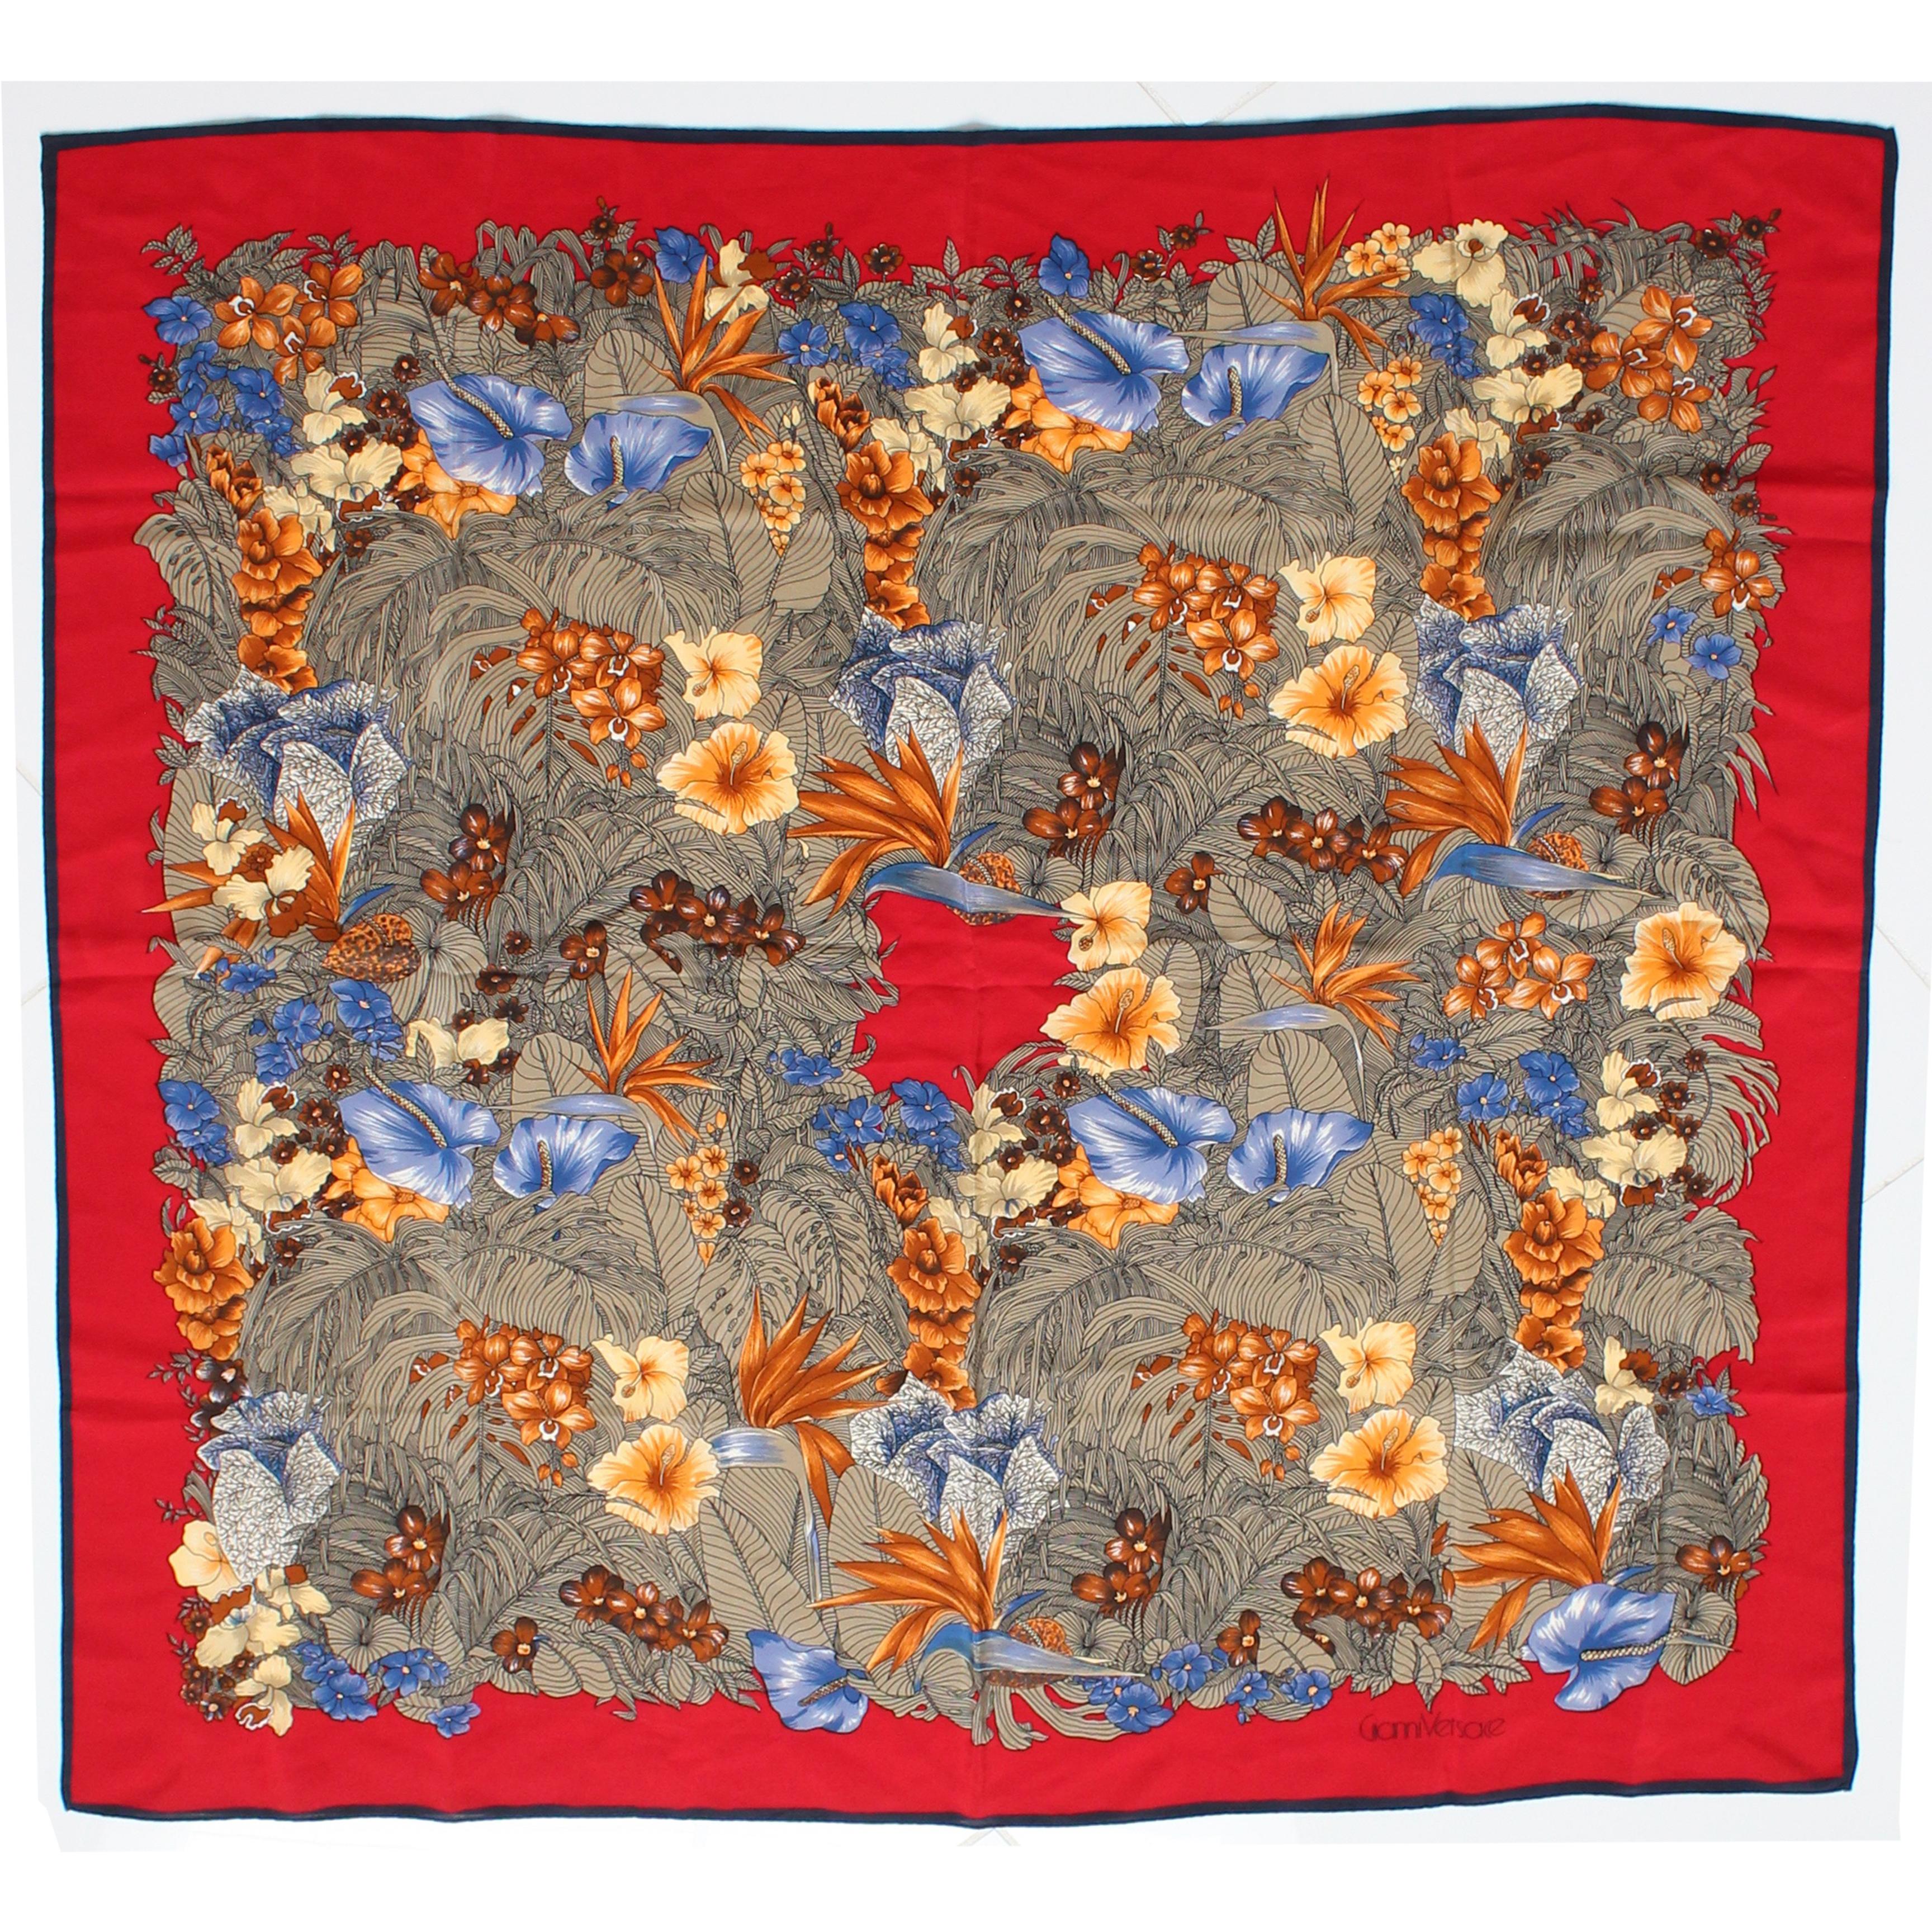 This colorful silk scarf or shawl was made by Gianni Versace, most likely in the early 90s. Made from silk, it features a beautiful red border with a stunning graphic floral print throughout.   At 35in square, it can be worn several ways and the